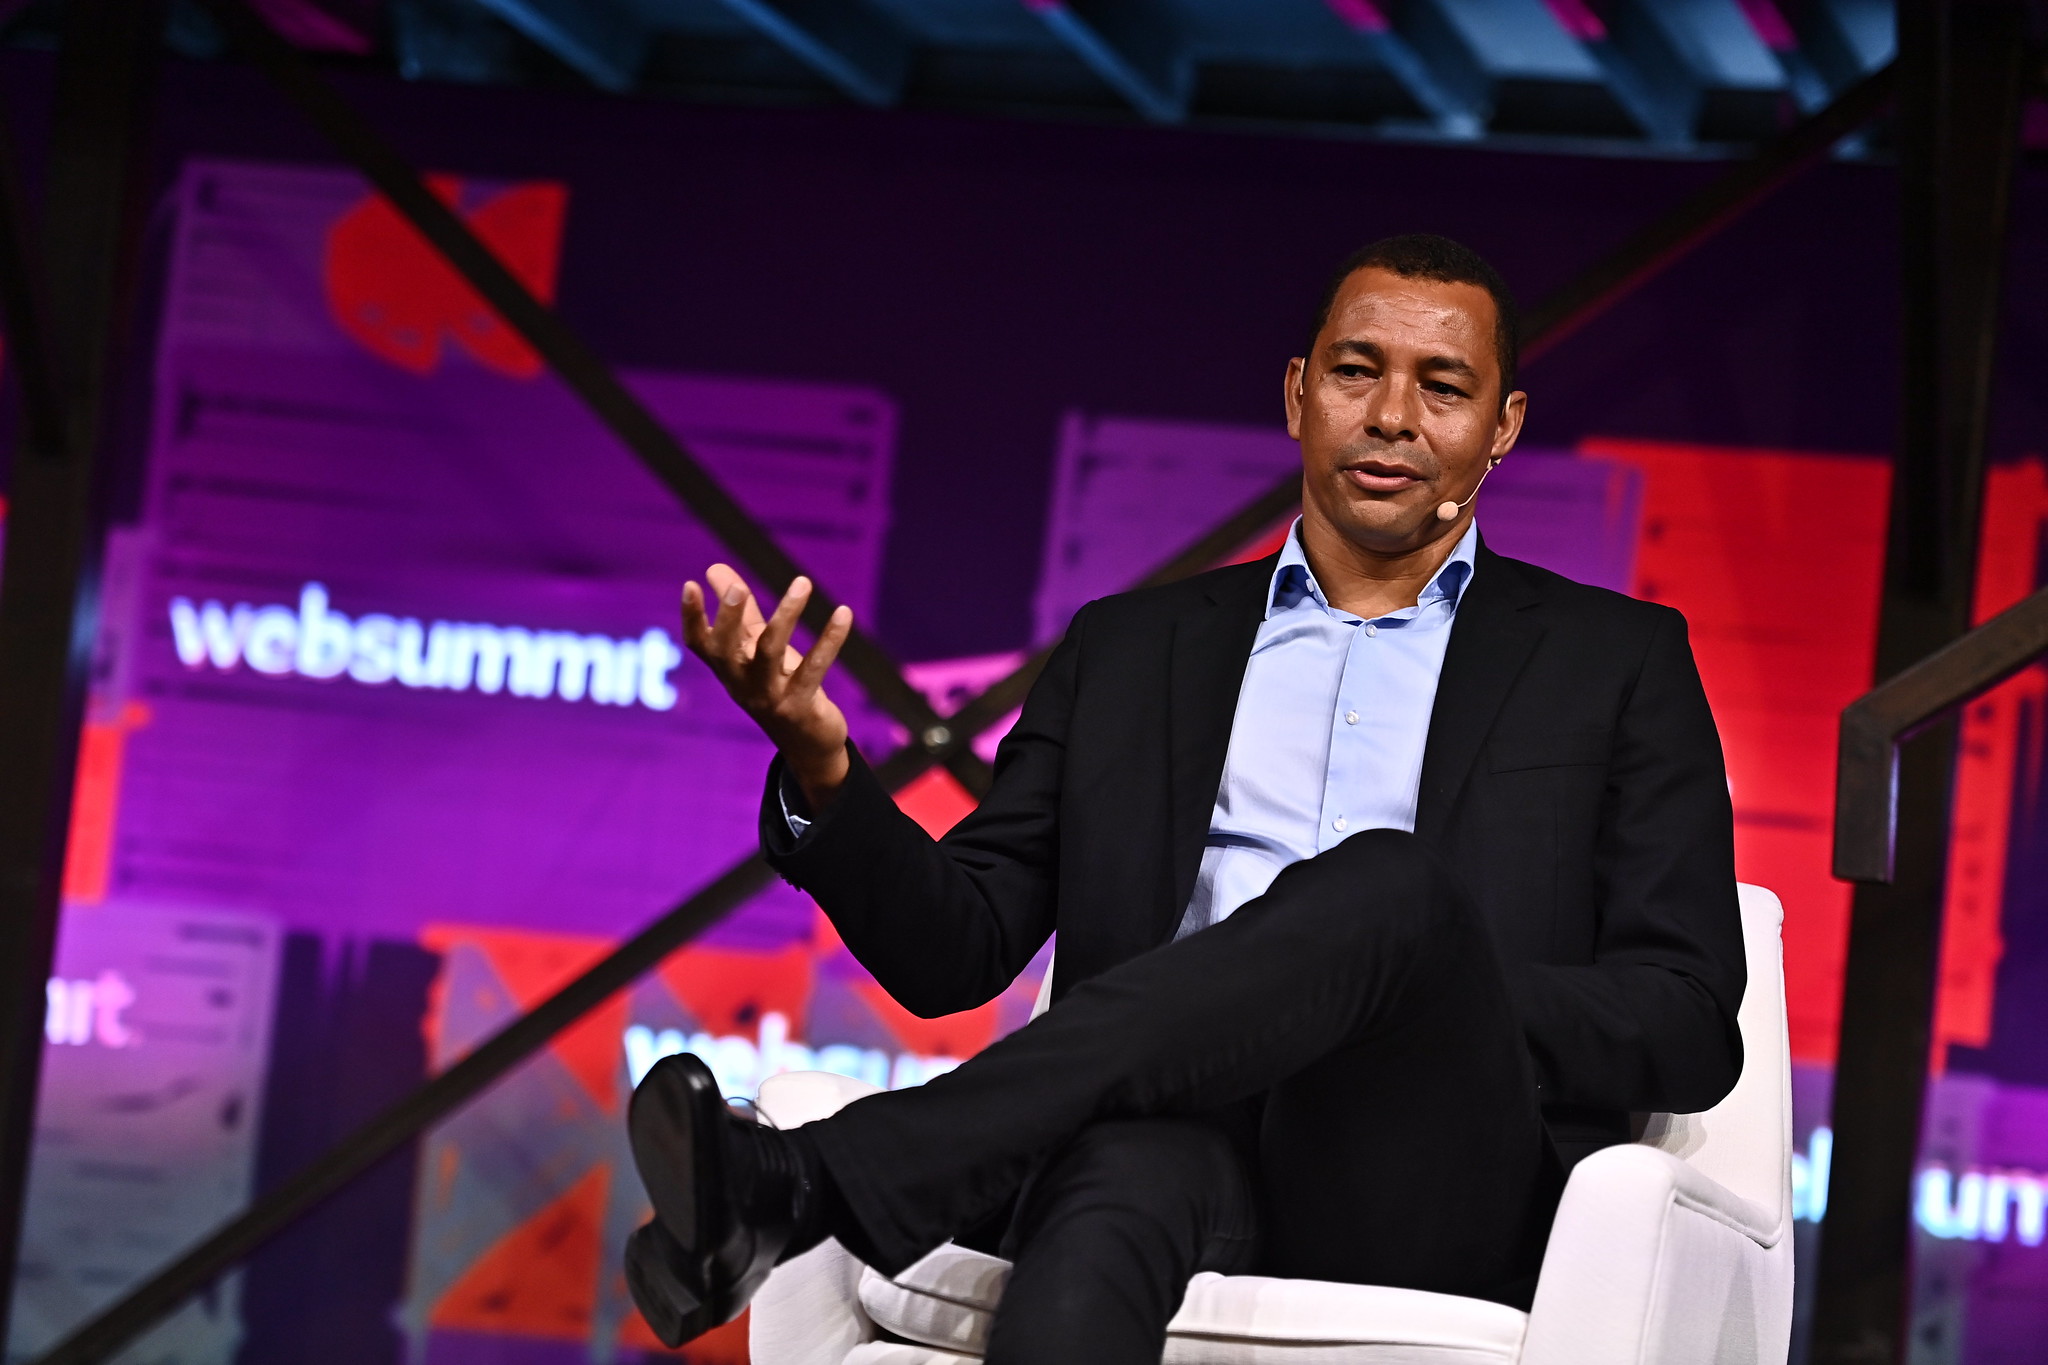 Photograph of World Cup Winner Gilberto Silva on stage at Web Summit. Gilberto is sitting on a chair and has one hand lifted as if asking a question. The Web Summit logo is visible in the background.